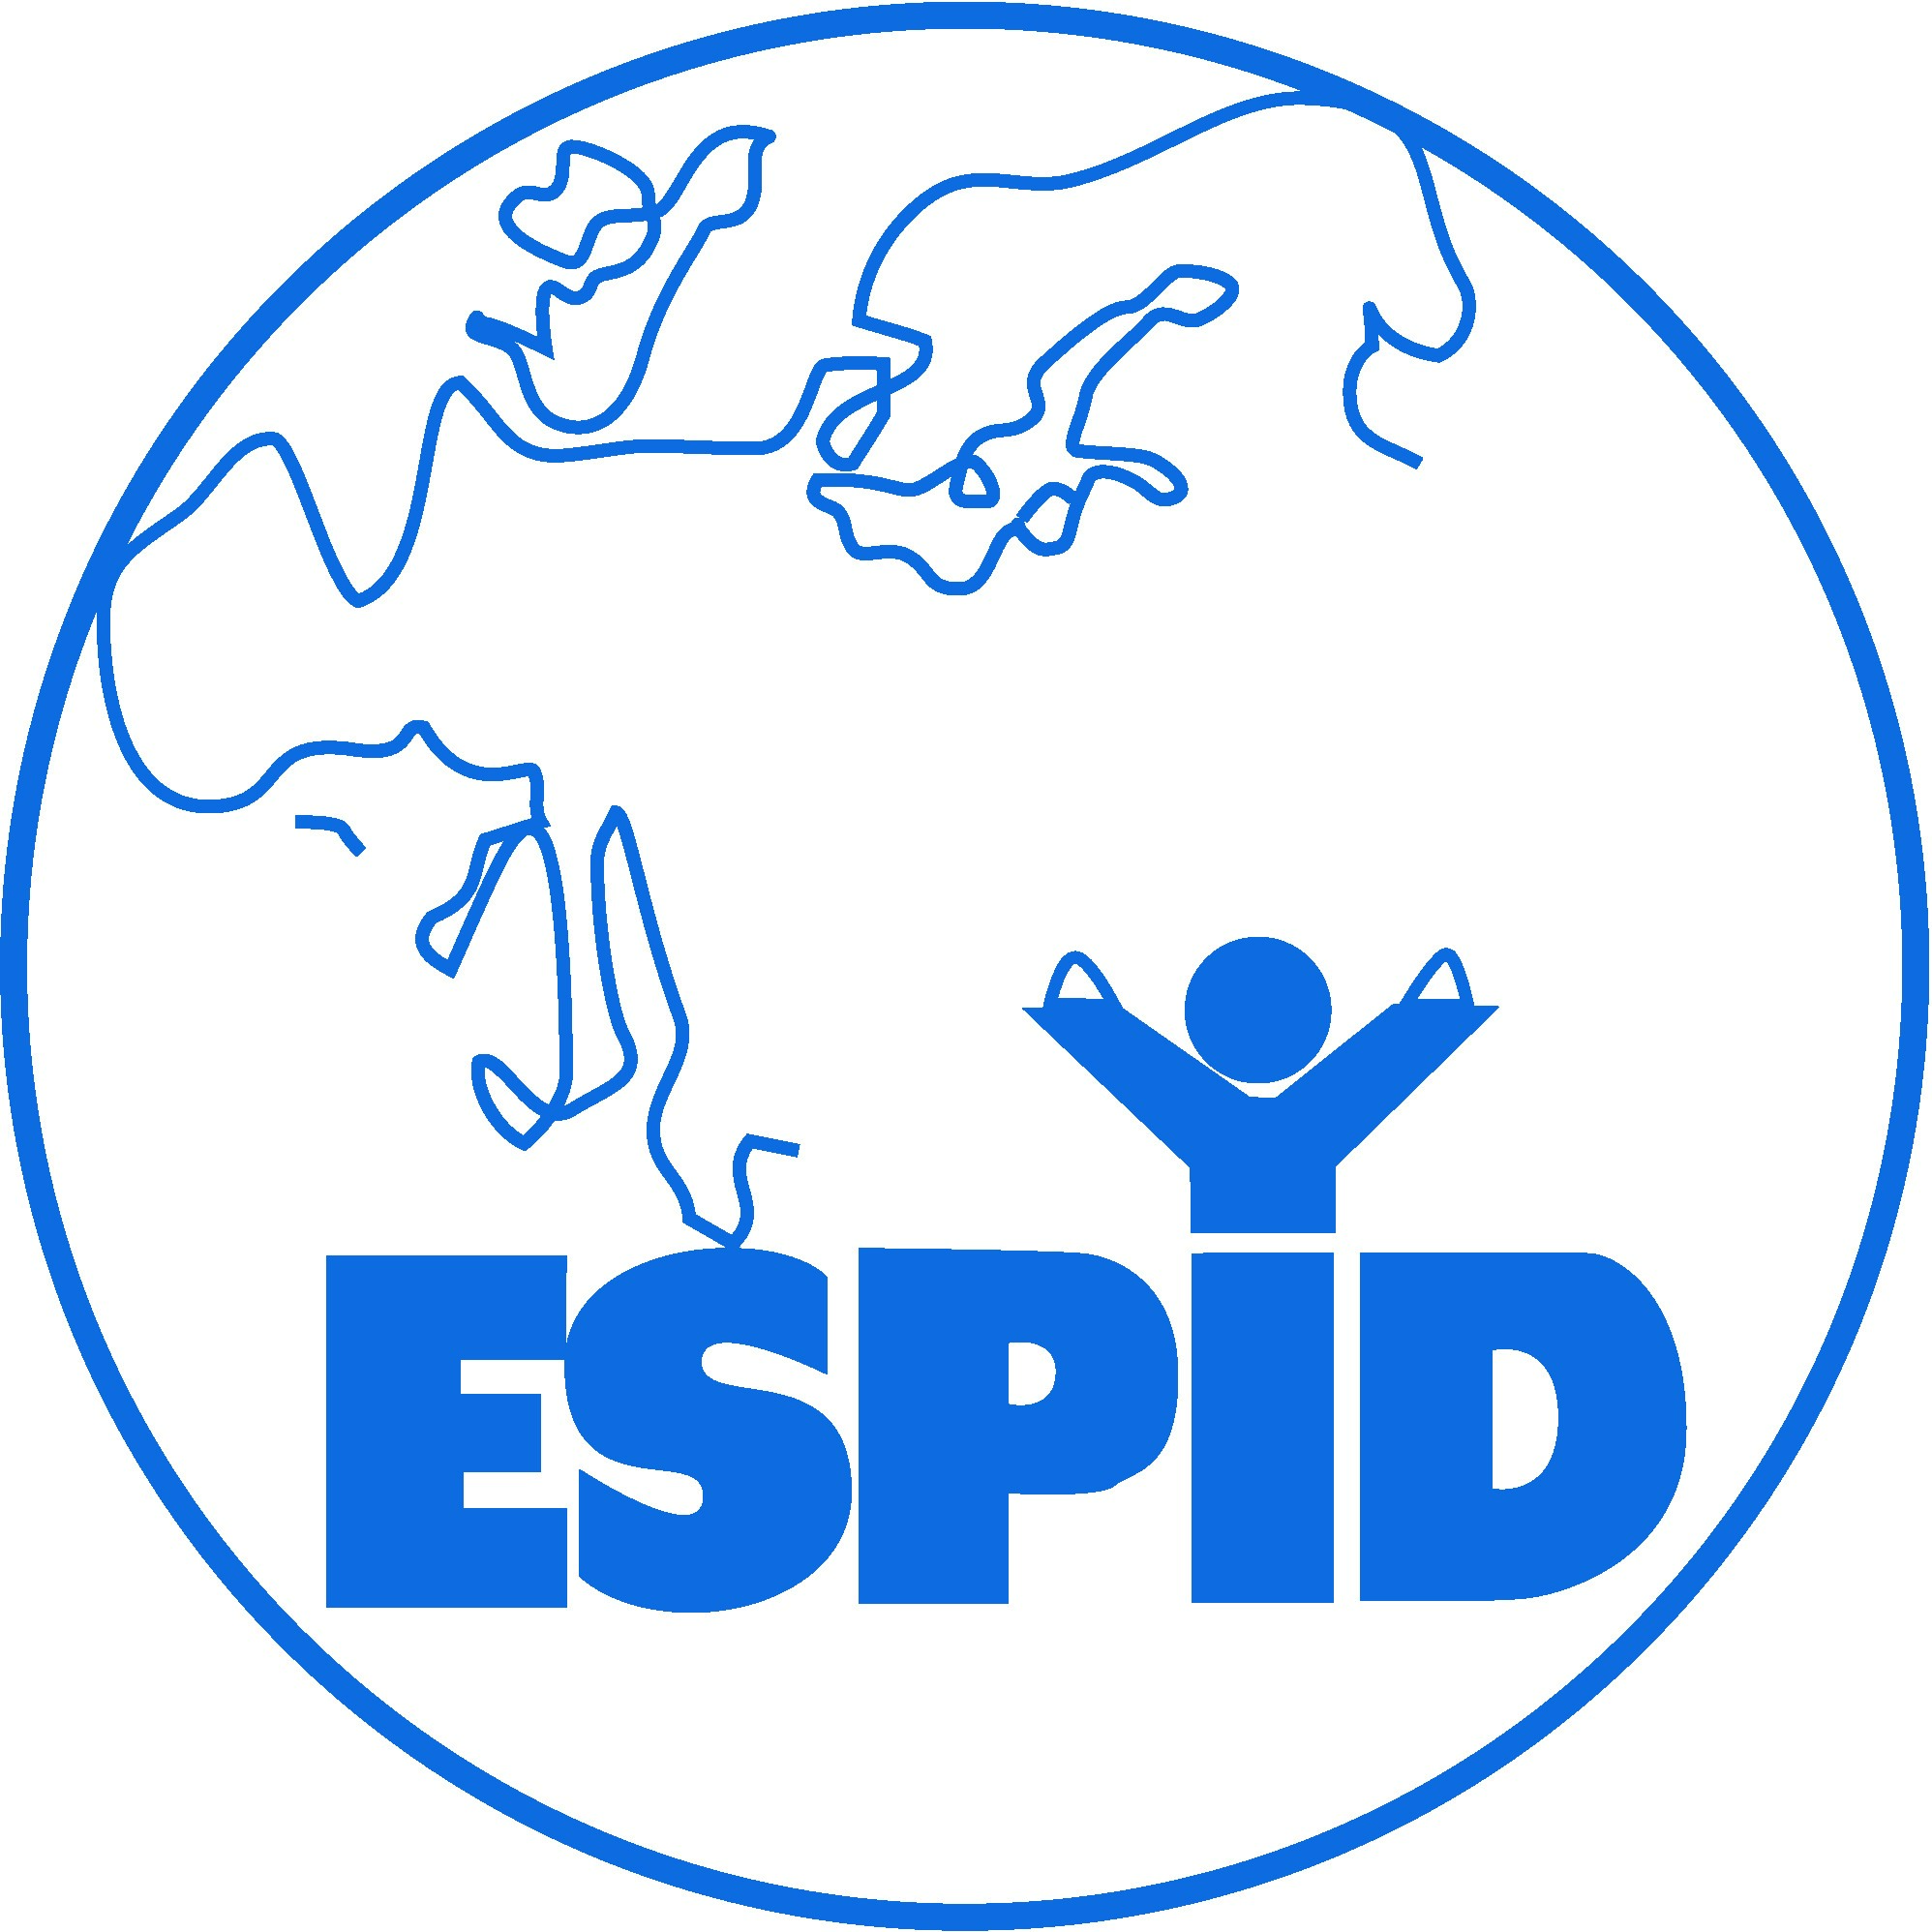 ESPID 2022 ONLINE - The 40th Meeting of The European Society for Paediatric Infectious Diseases / Online